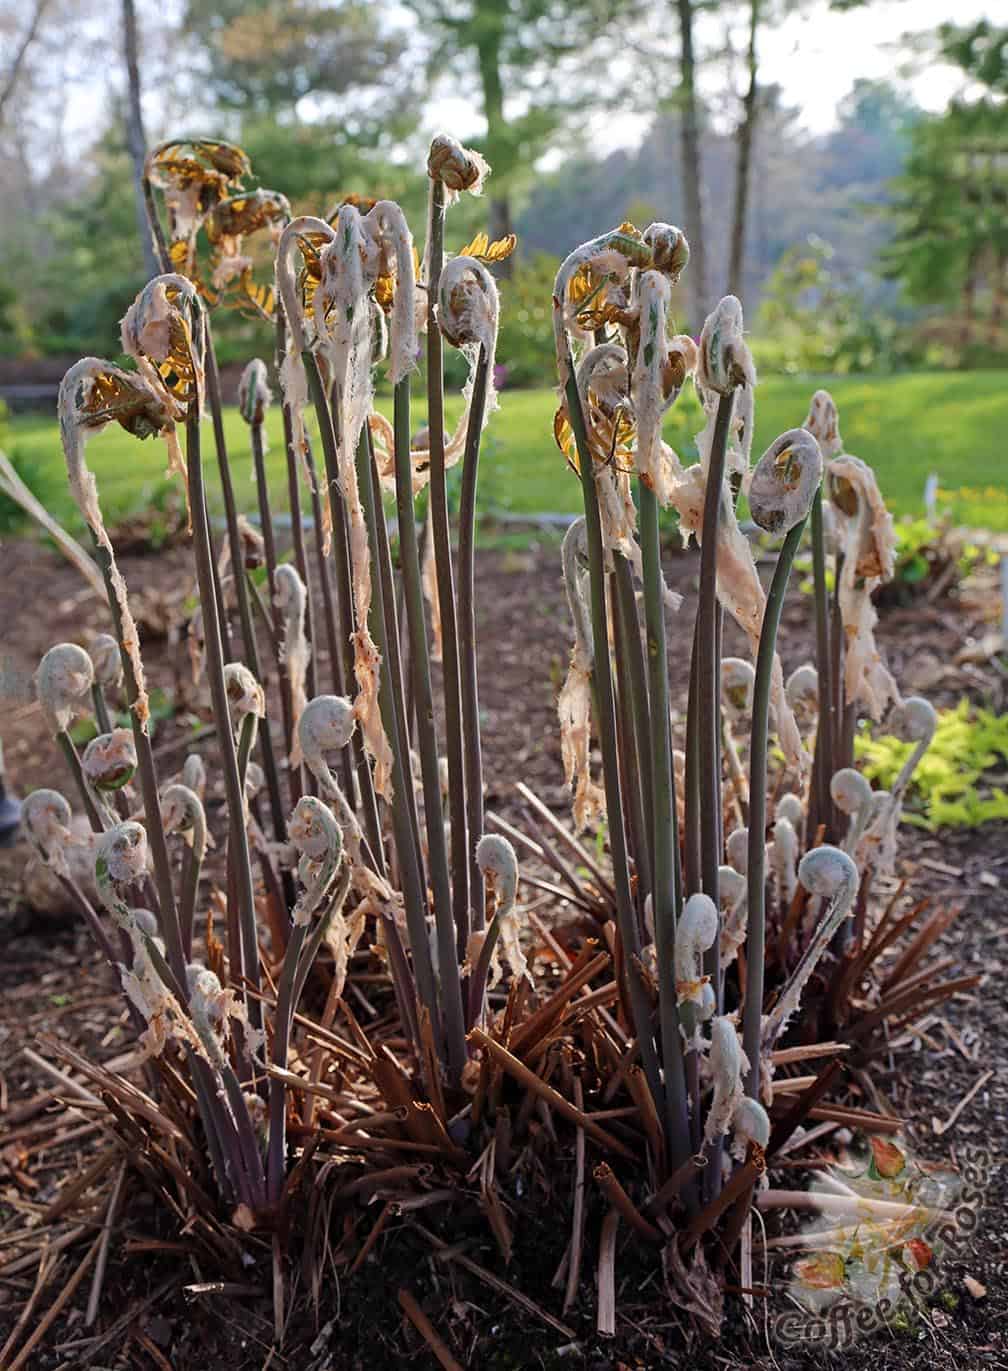 Watching the Osmunda fern grow helps me to remember to stop and appreciate how lovely this season is.